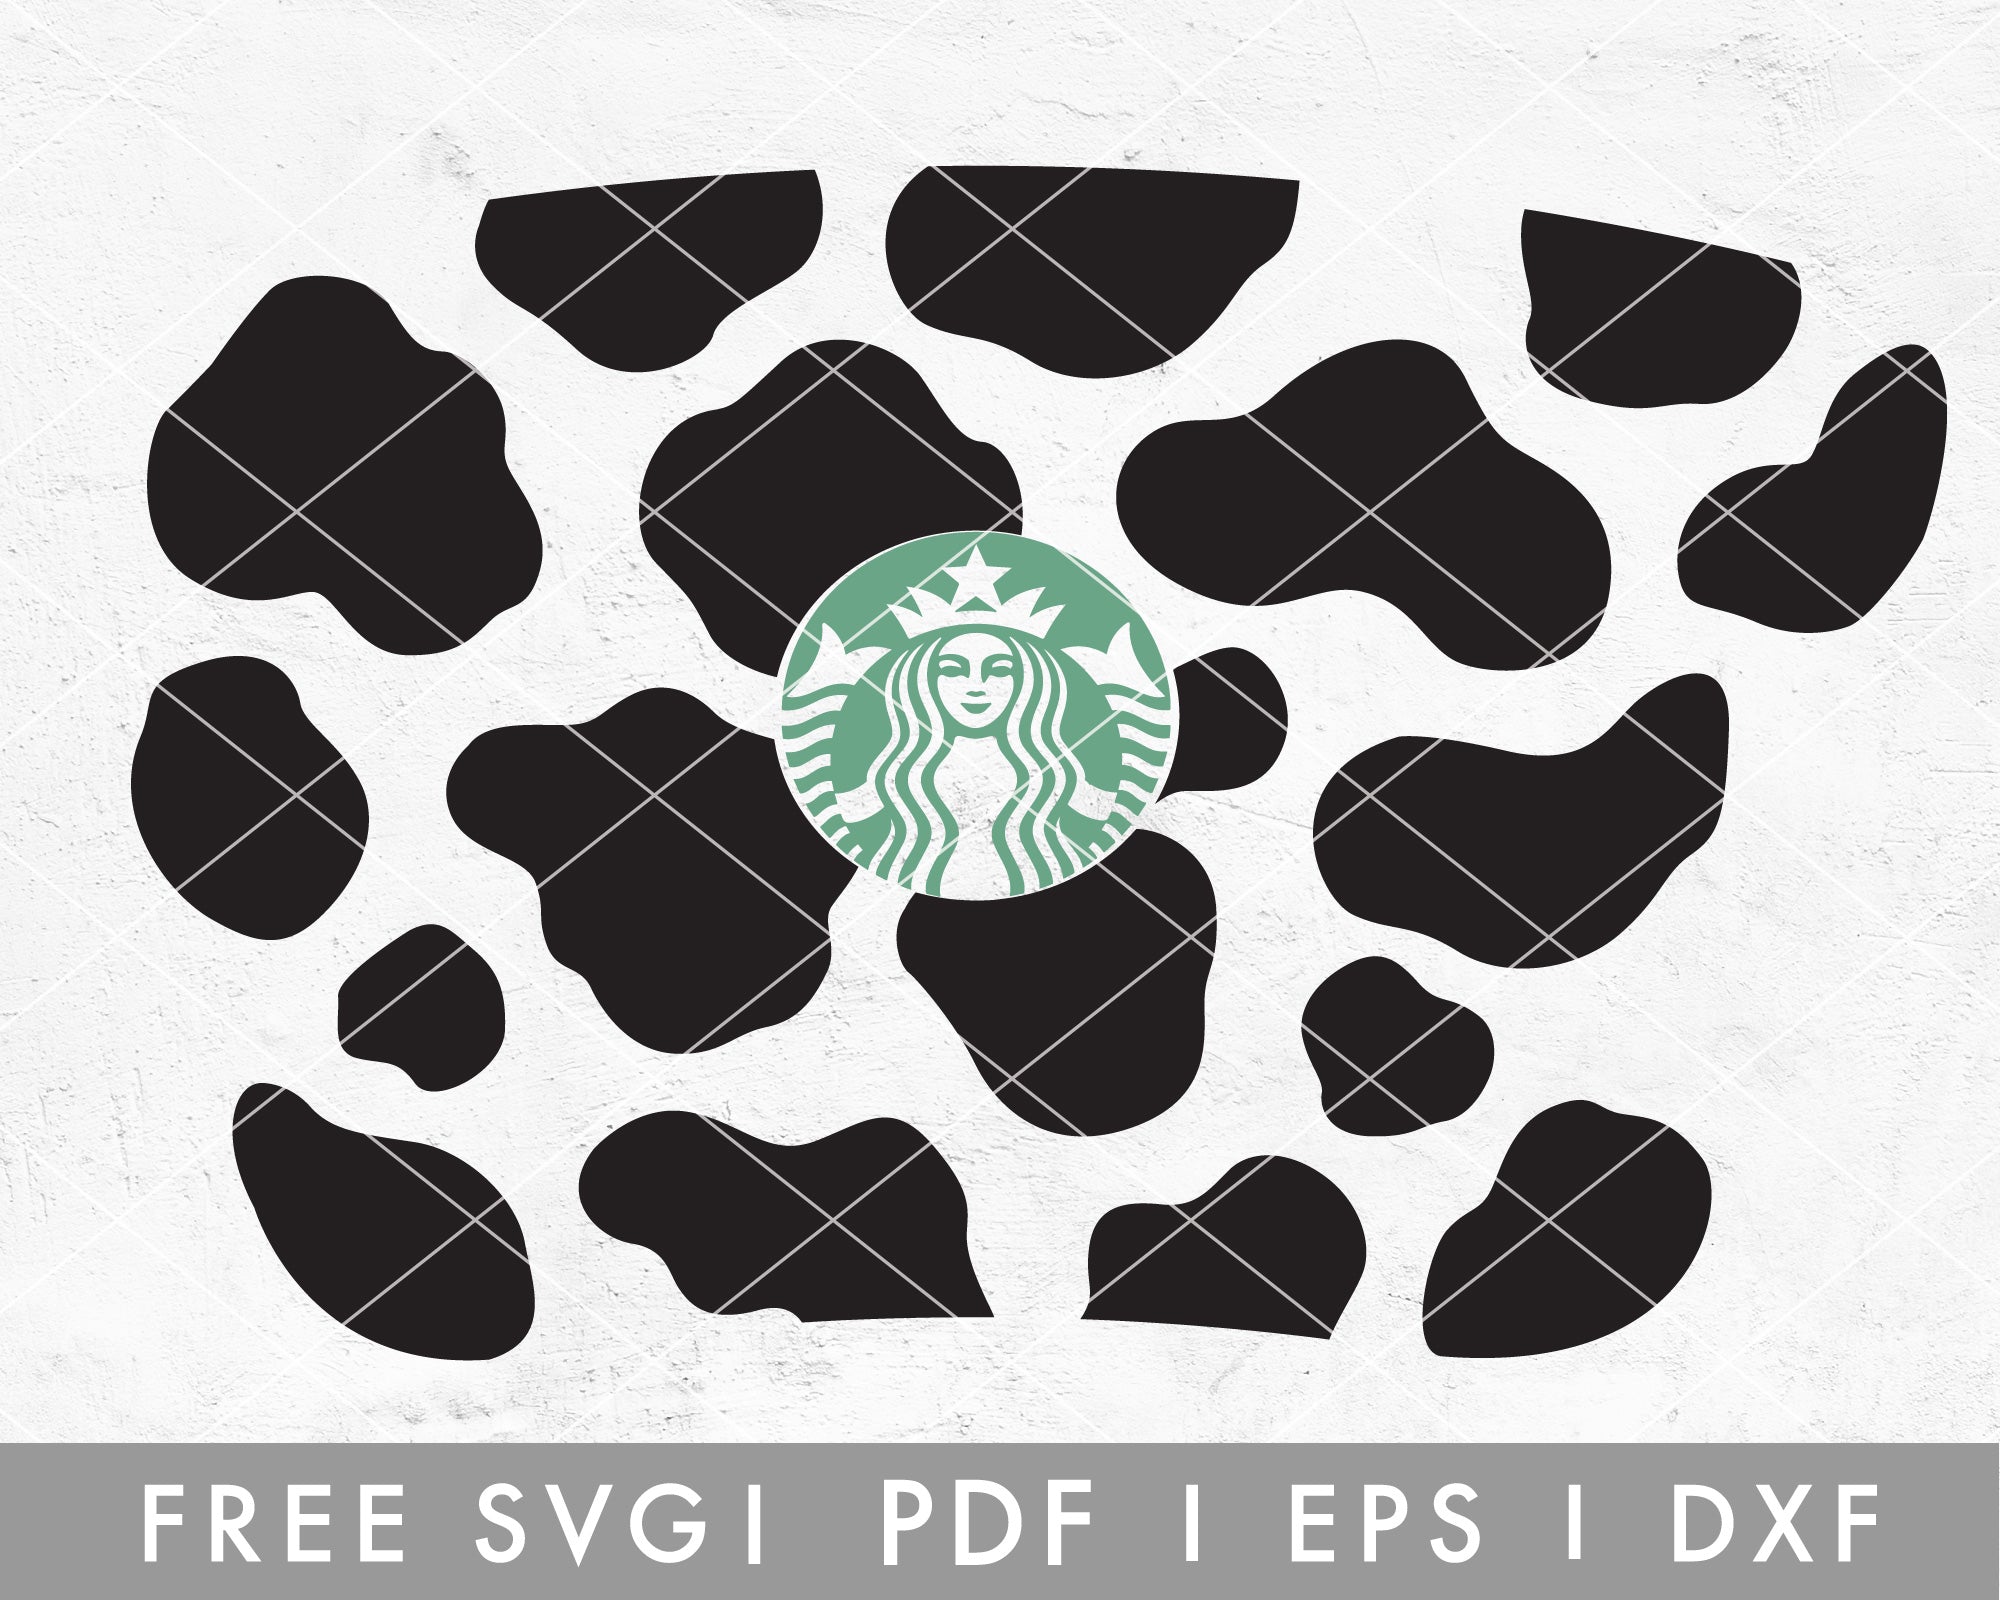 How to Make a Starbucks Cold Cup Wrap [with FREE Template]